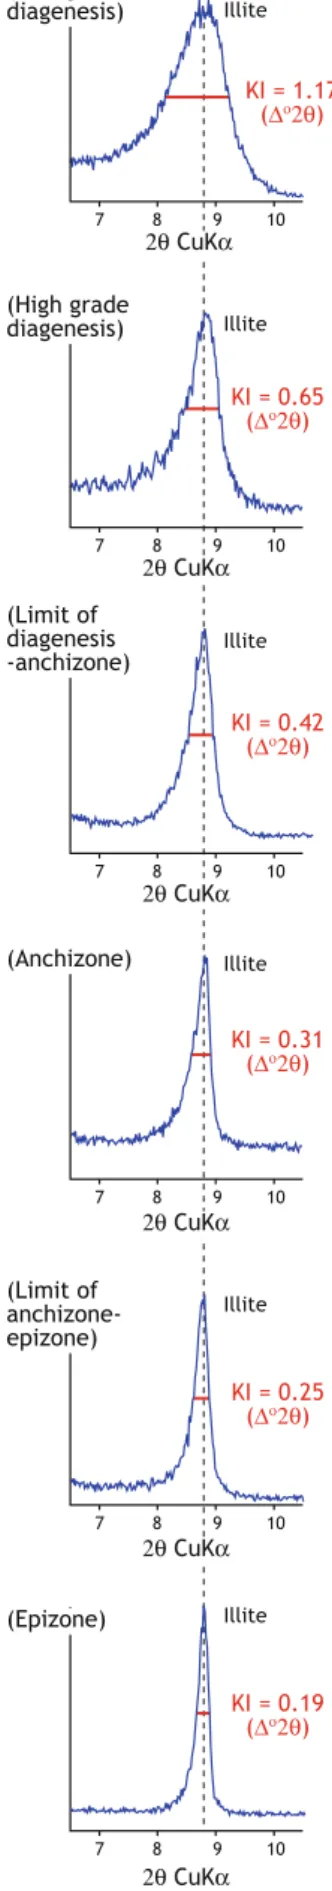 Fig. 1 XRD-plots of the 10 A ˚ -peak of illite. With increasing metamorphism the sharpness, expressed as full width at half maximum intensity or Ku¨bler-Index (KI) decreases from low-grade diagenesis to the epizone (mostly equivalent to sub-greenschist fac